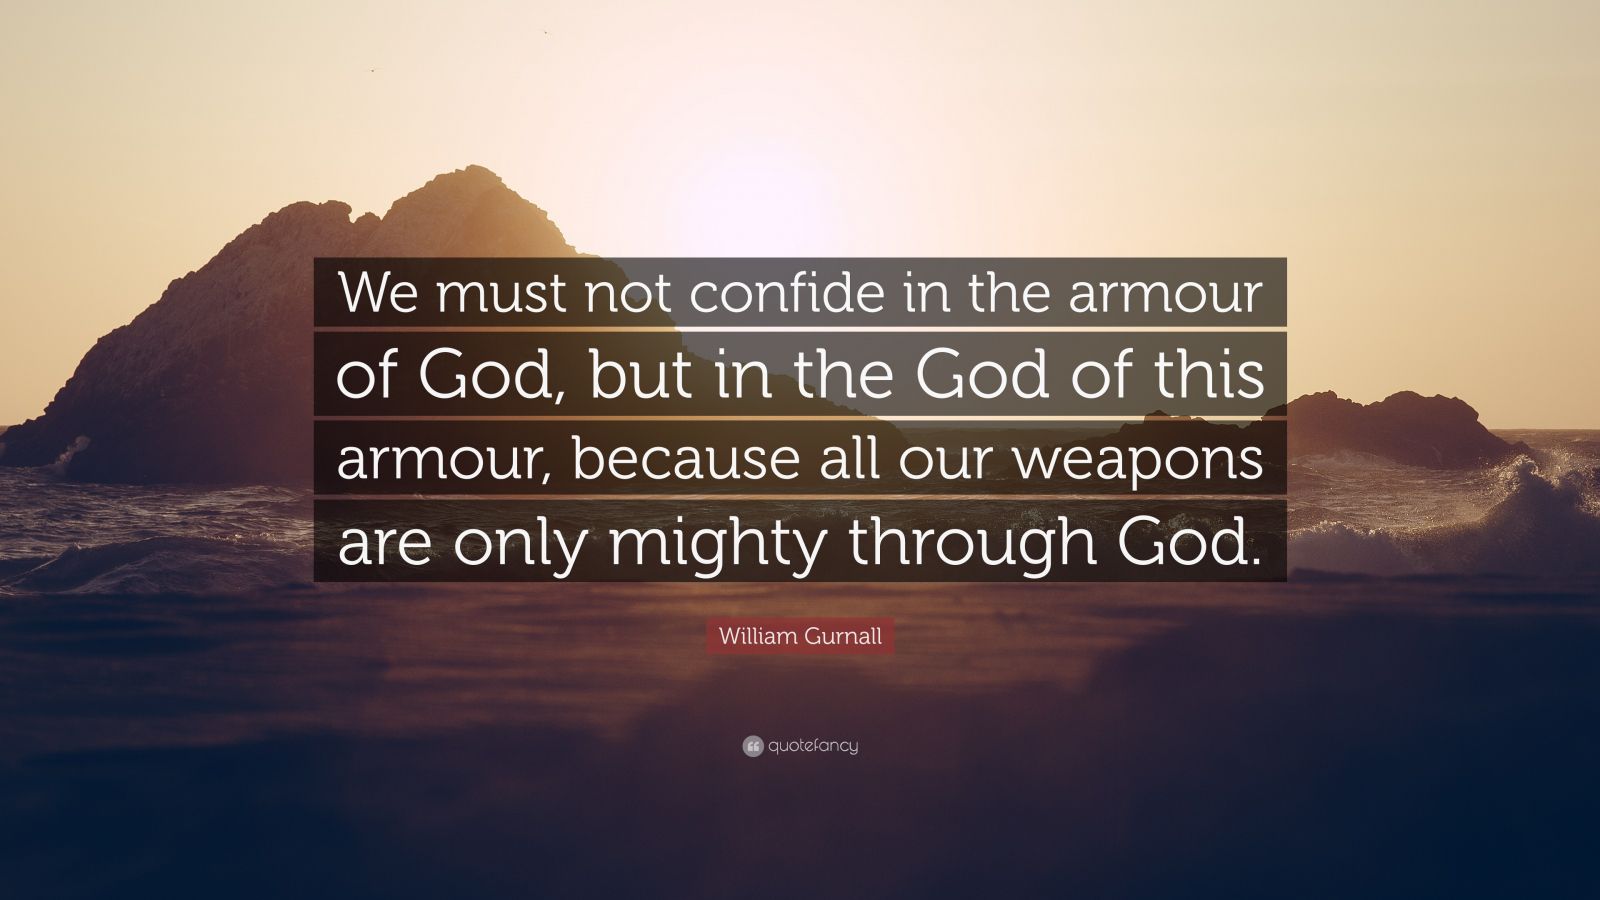 William Gurnall Quote: “We must not confide in the armour of God, but